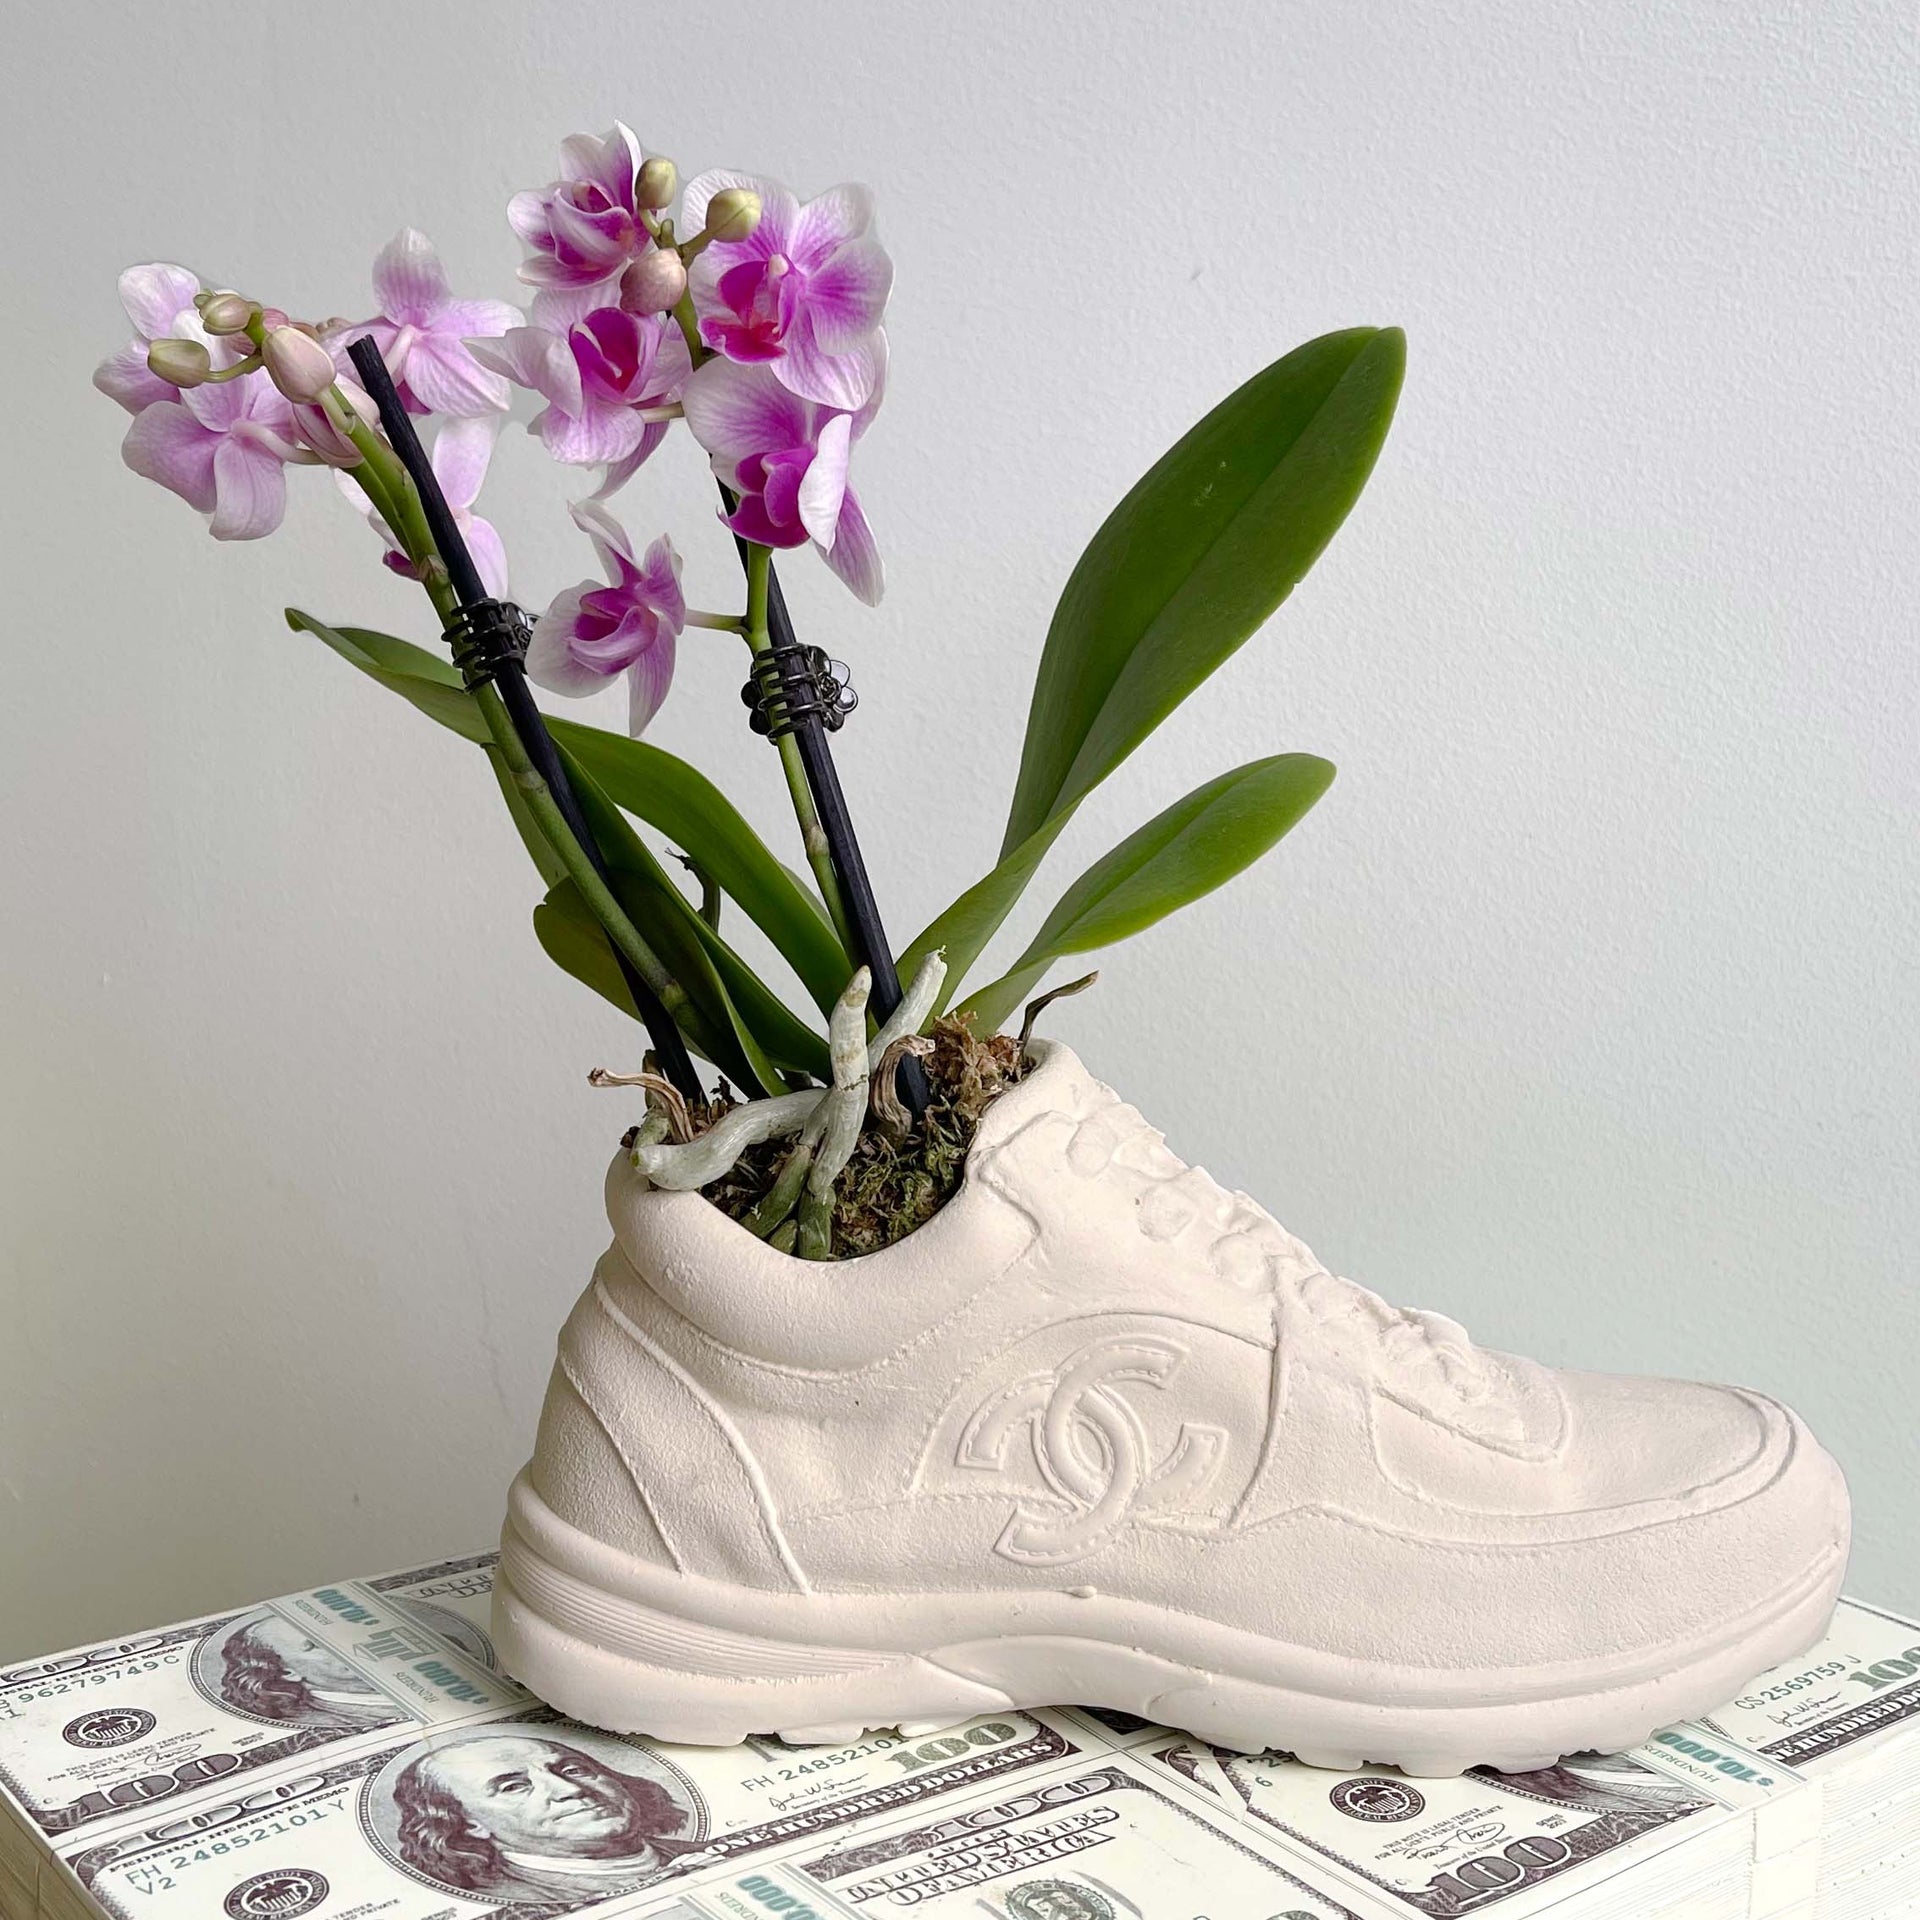 Chanel - Runners - Dubai Flowers (limited edition)